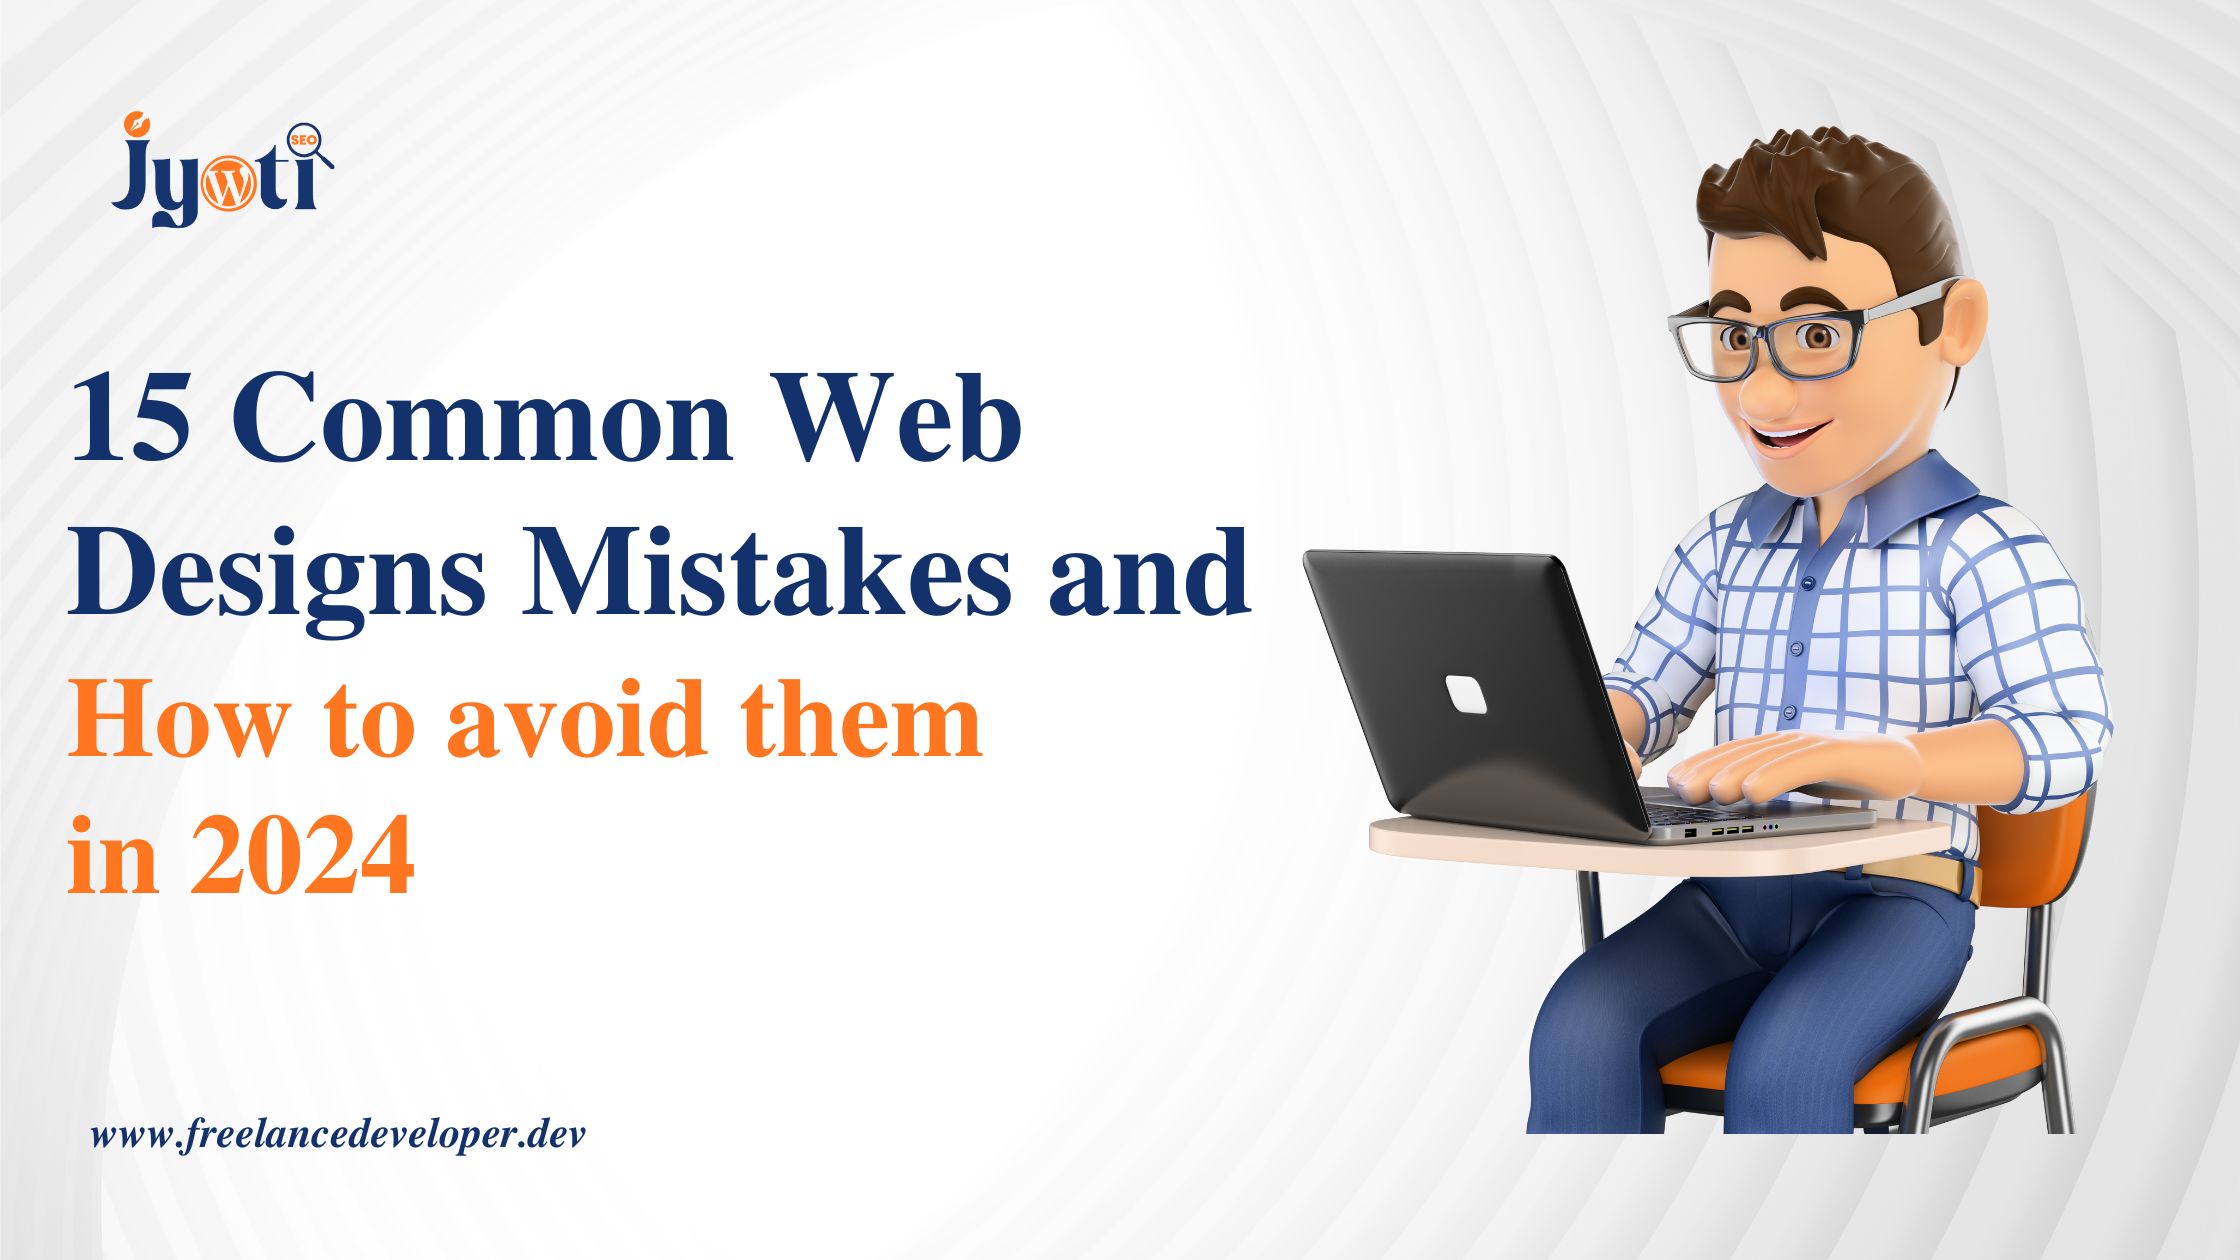 15 Common Web Designs Mistakes and How to avoid them in 2024